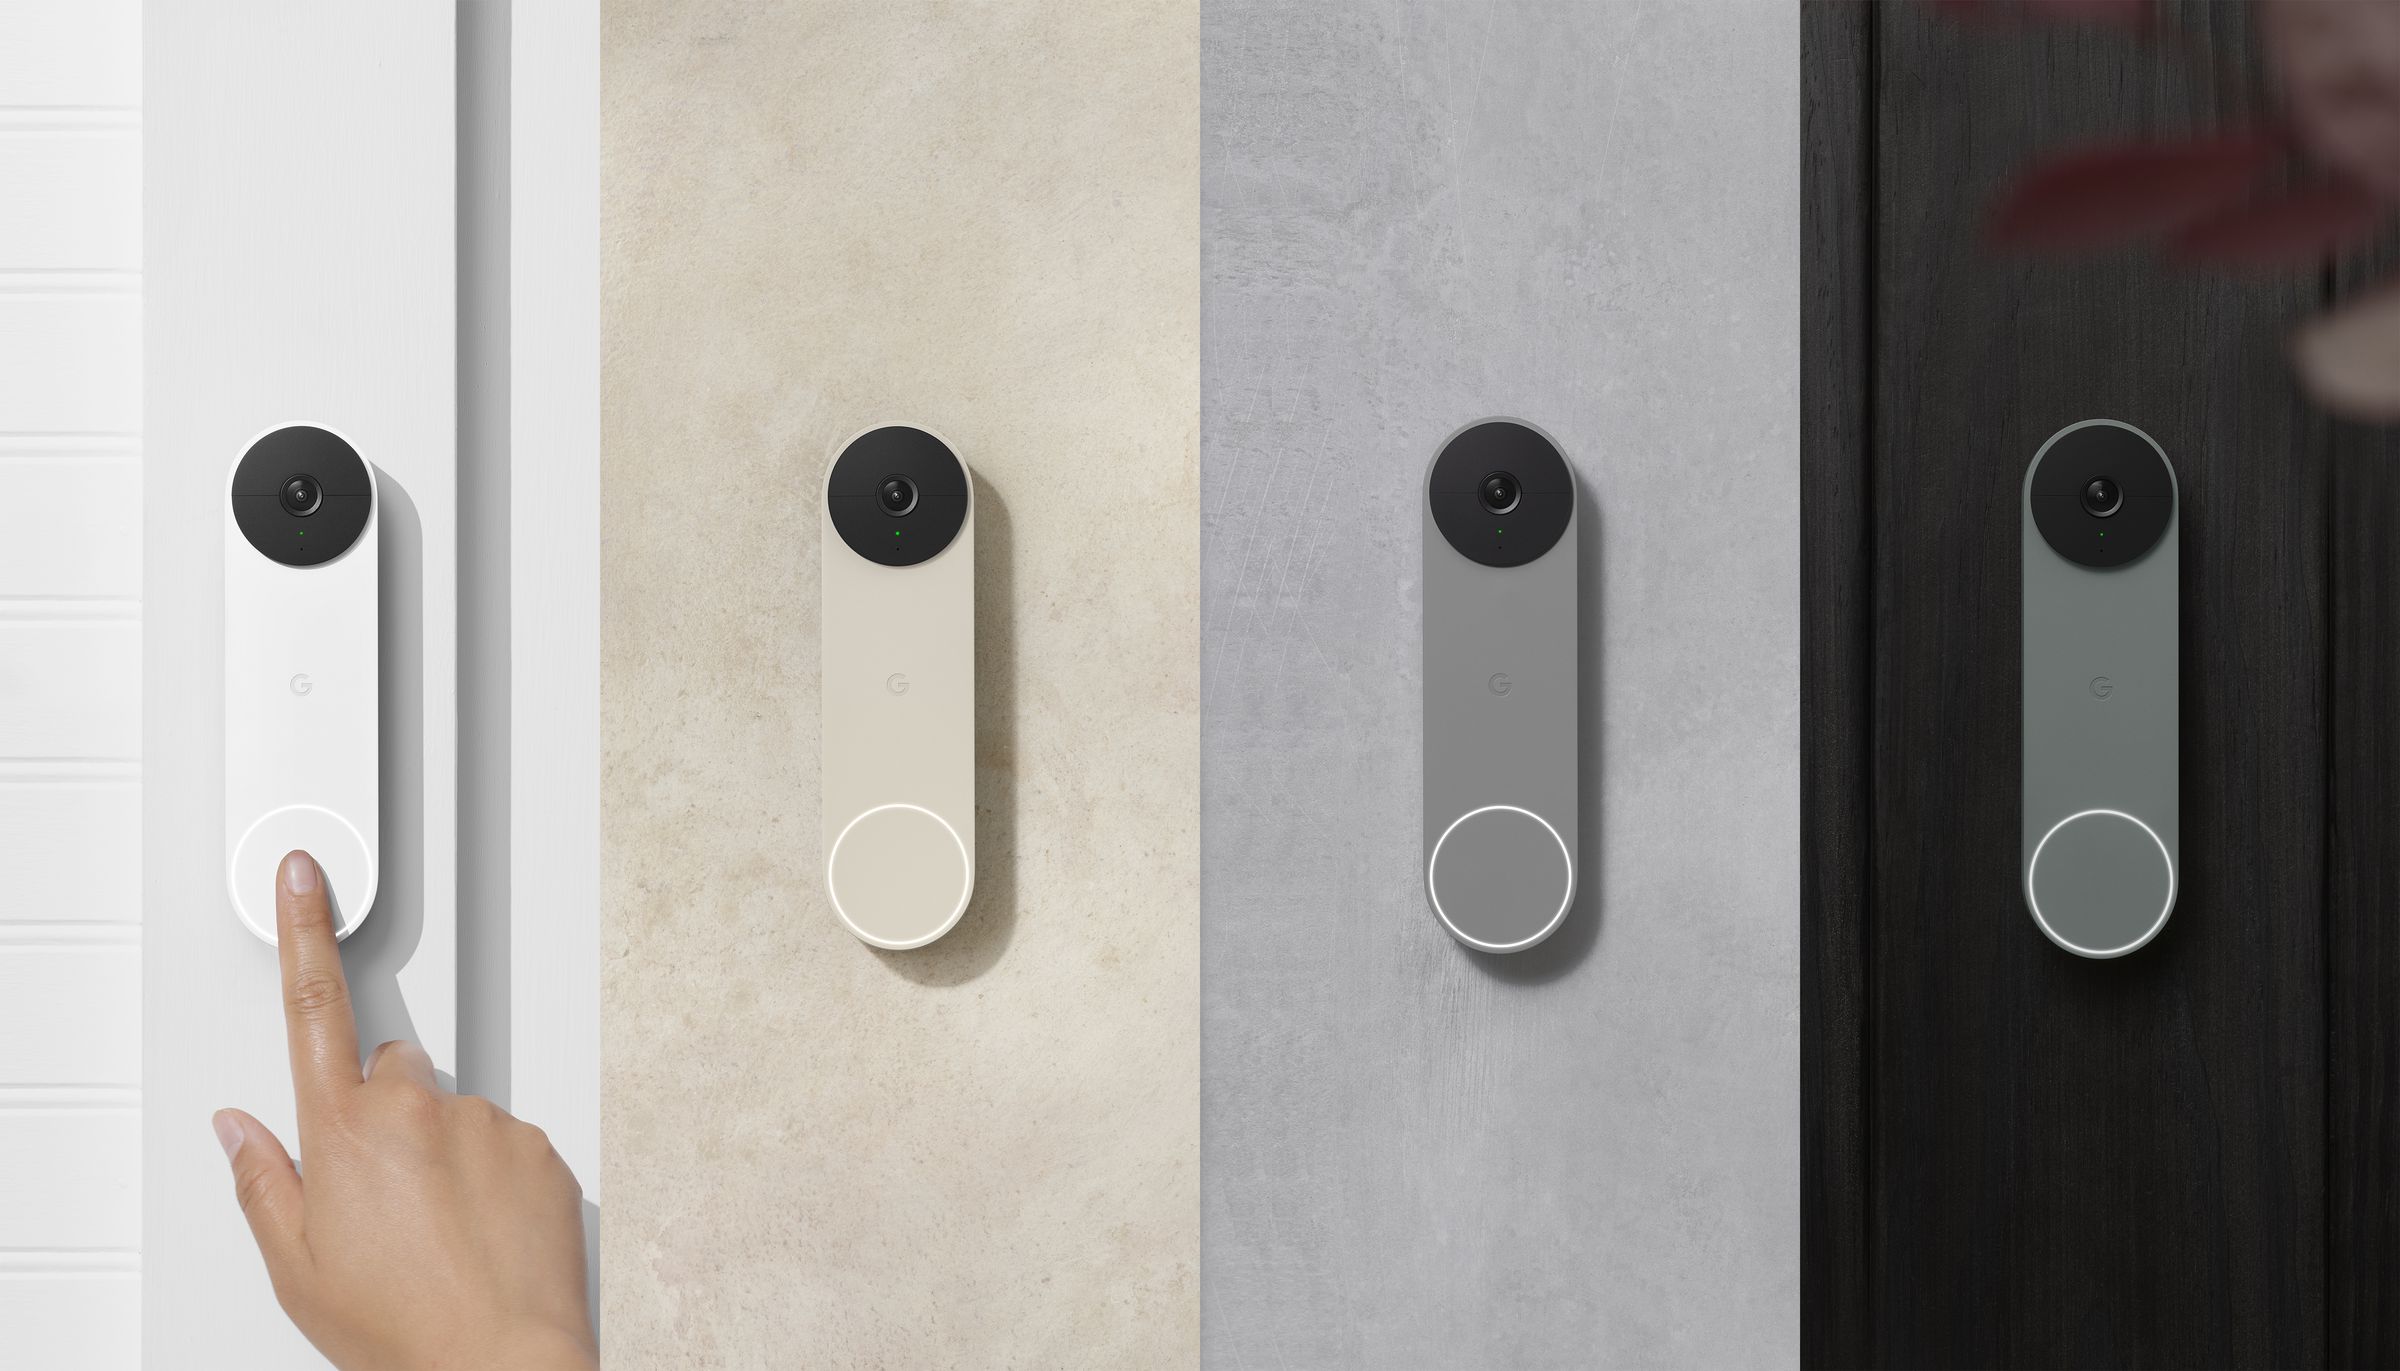 The Nest Doorbell is available in four different colors: white, beige, gray, or green.